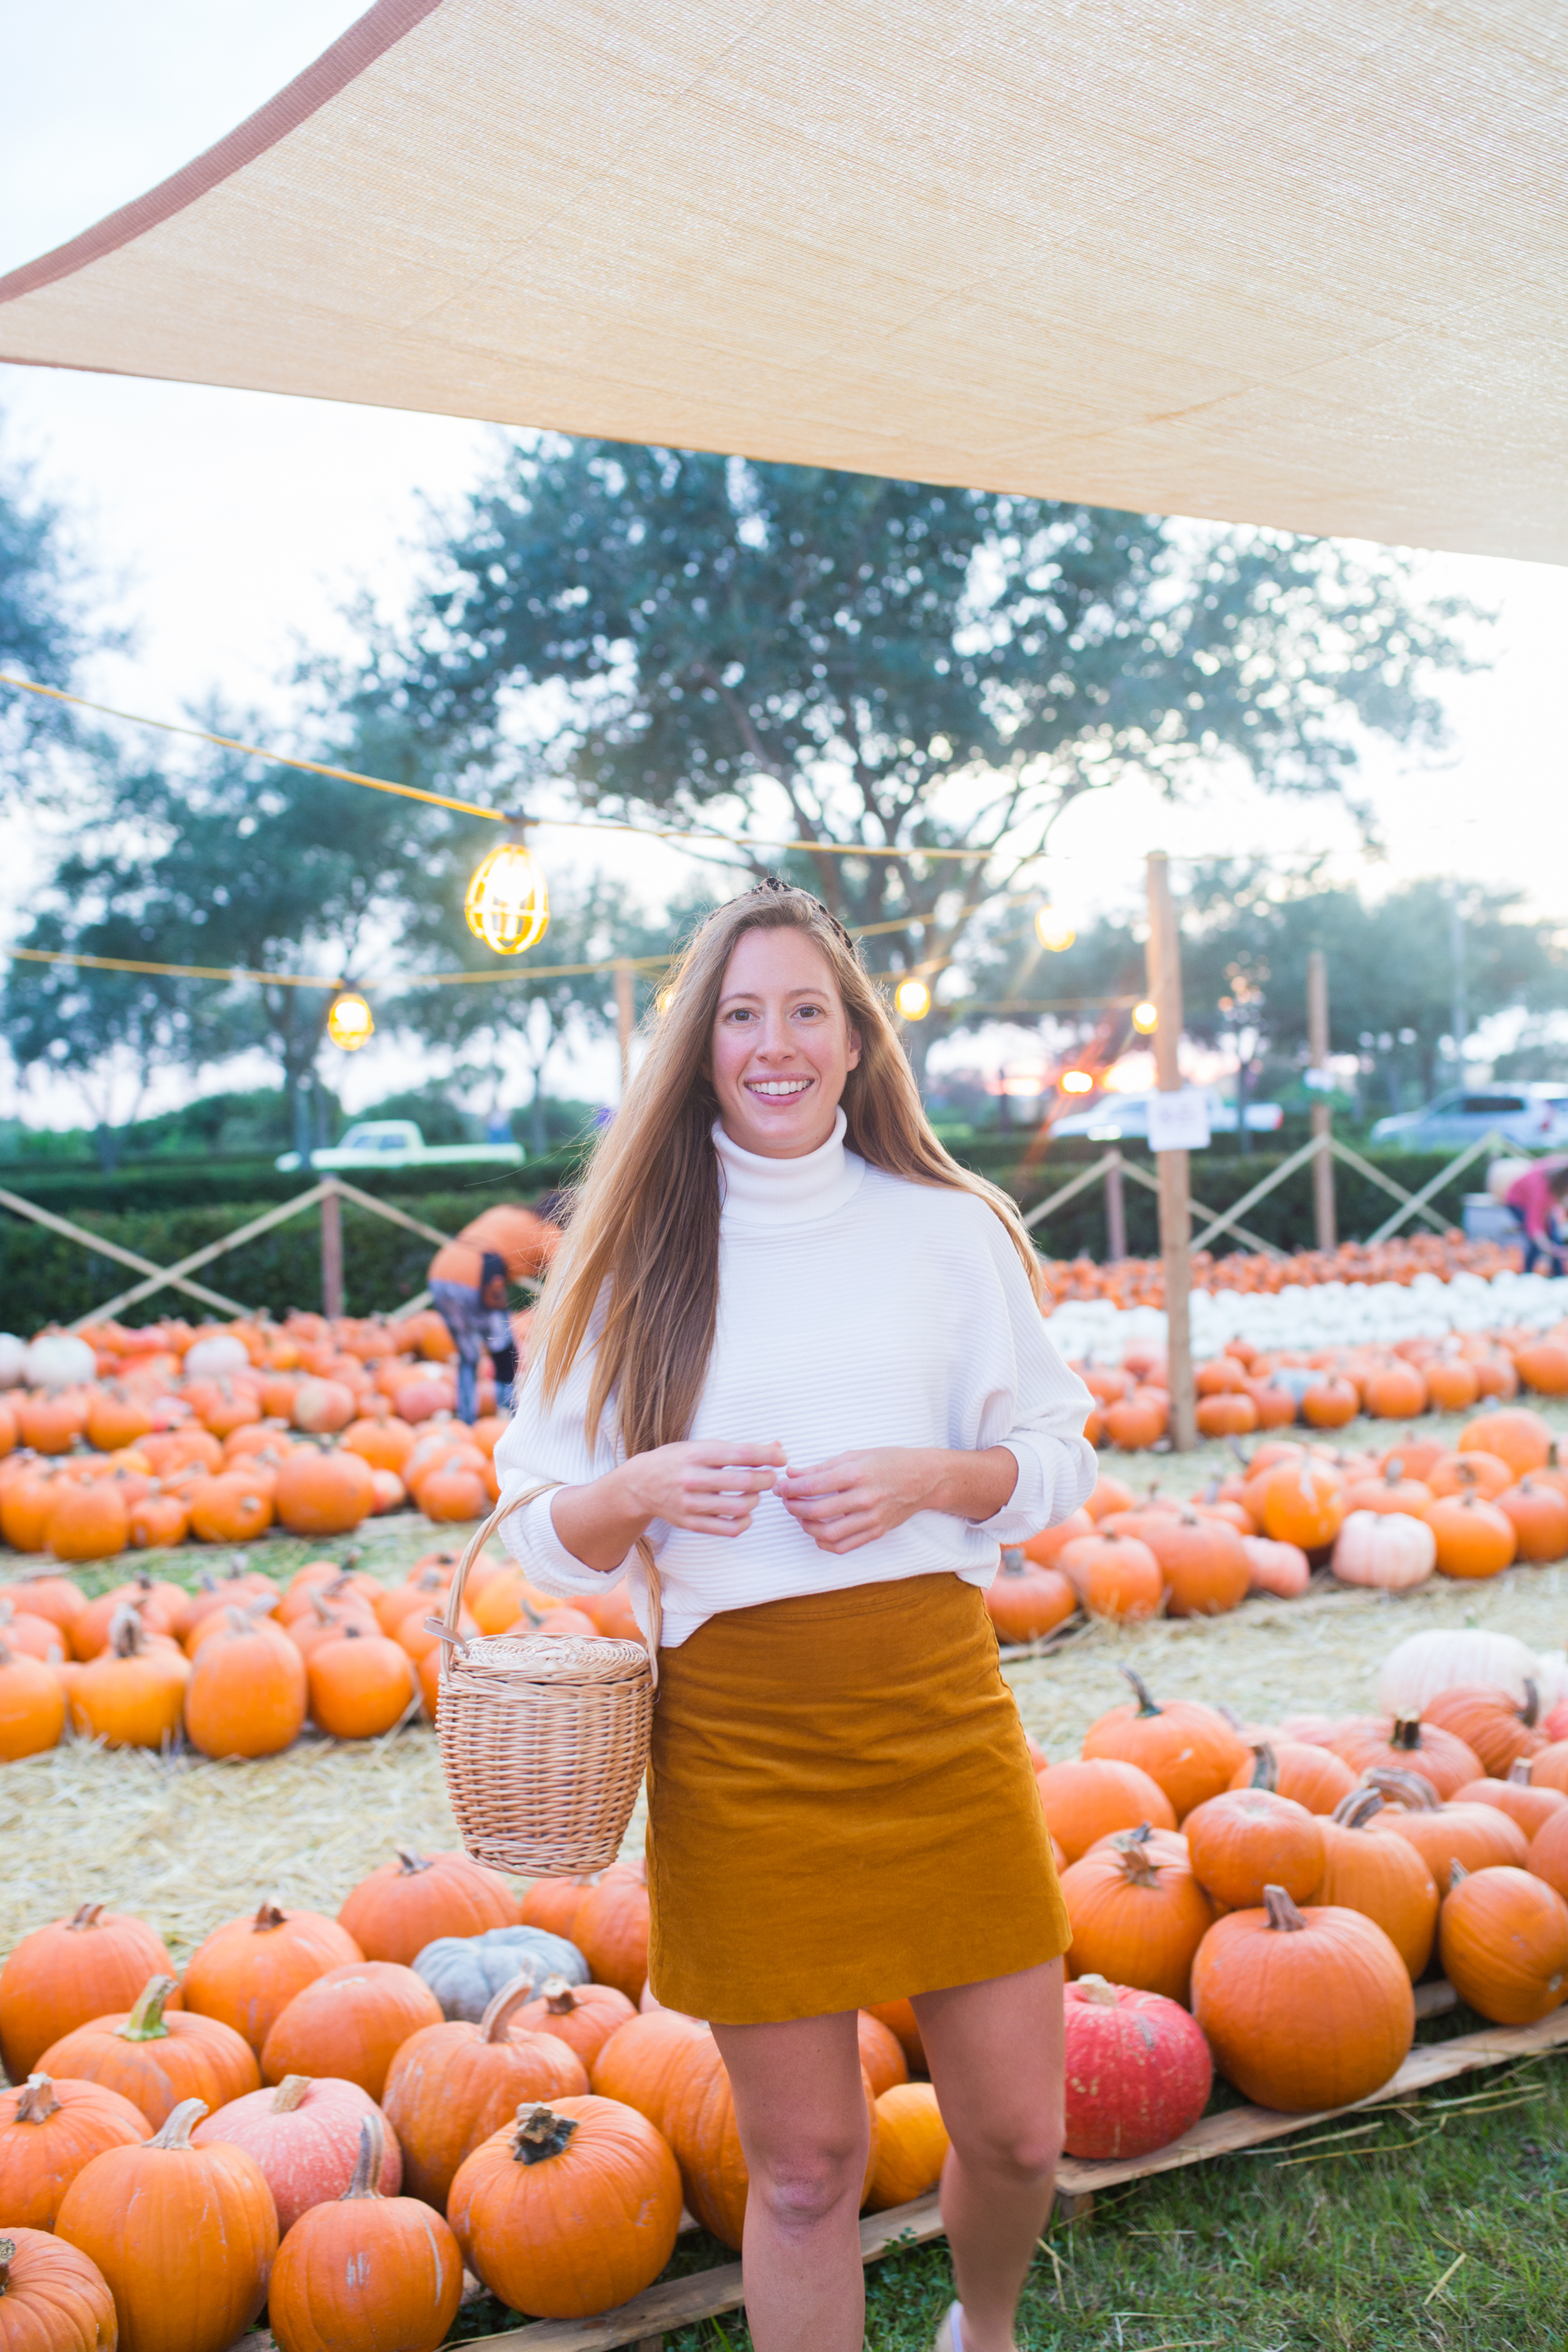 Fall Transition Outfit / Warm Weather Fall Outfits / Fall Outfits for Hot Weather / Florida Fall Outfits Women / Leopard Scrunchie / Corduroy Skirt / Knit Sweater / Sunshine Style - Florida Fashion Blogger By Katie 